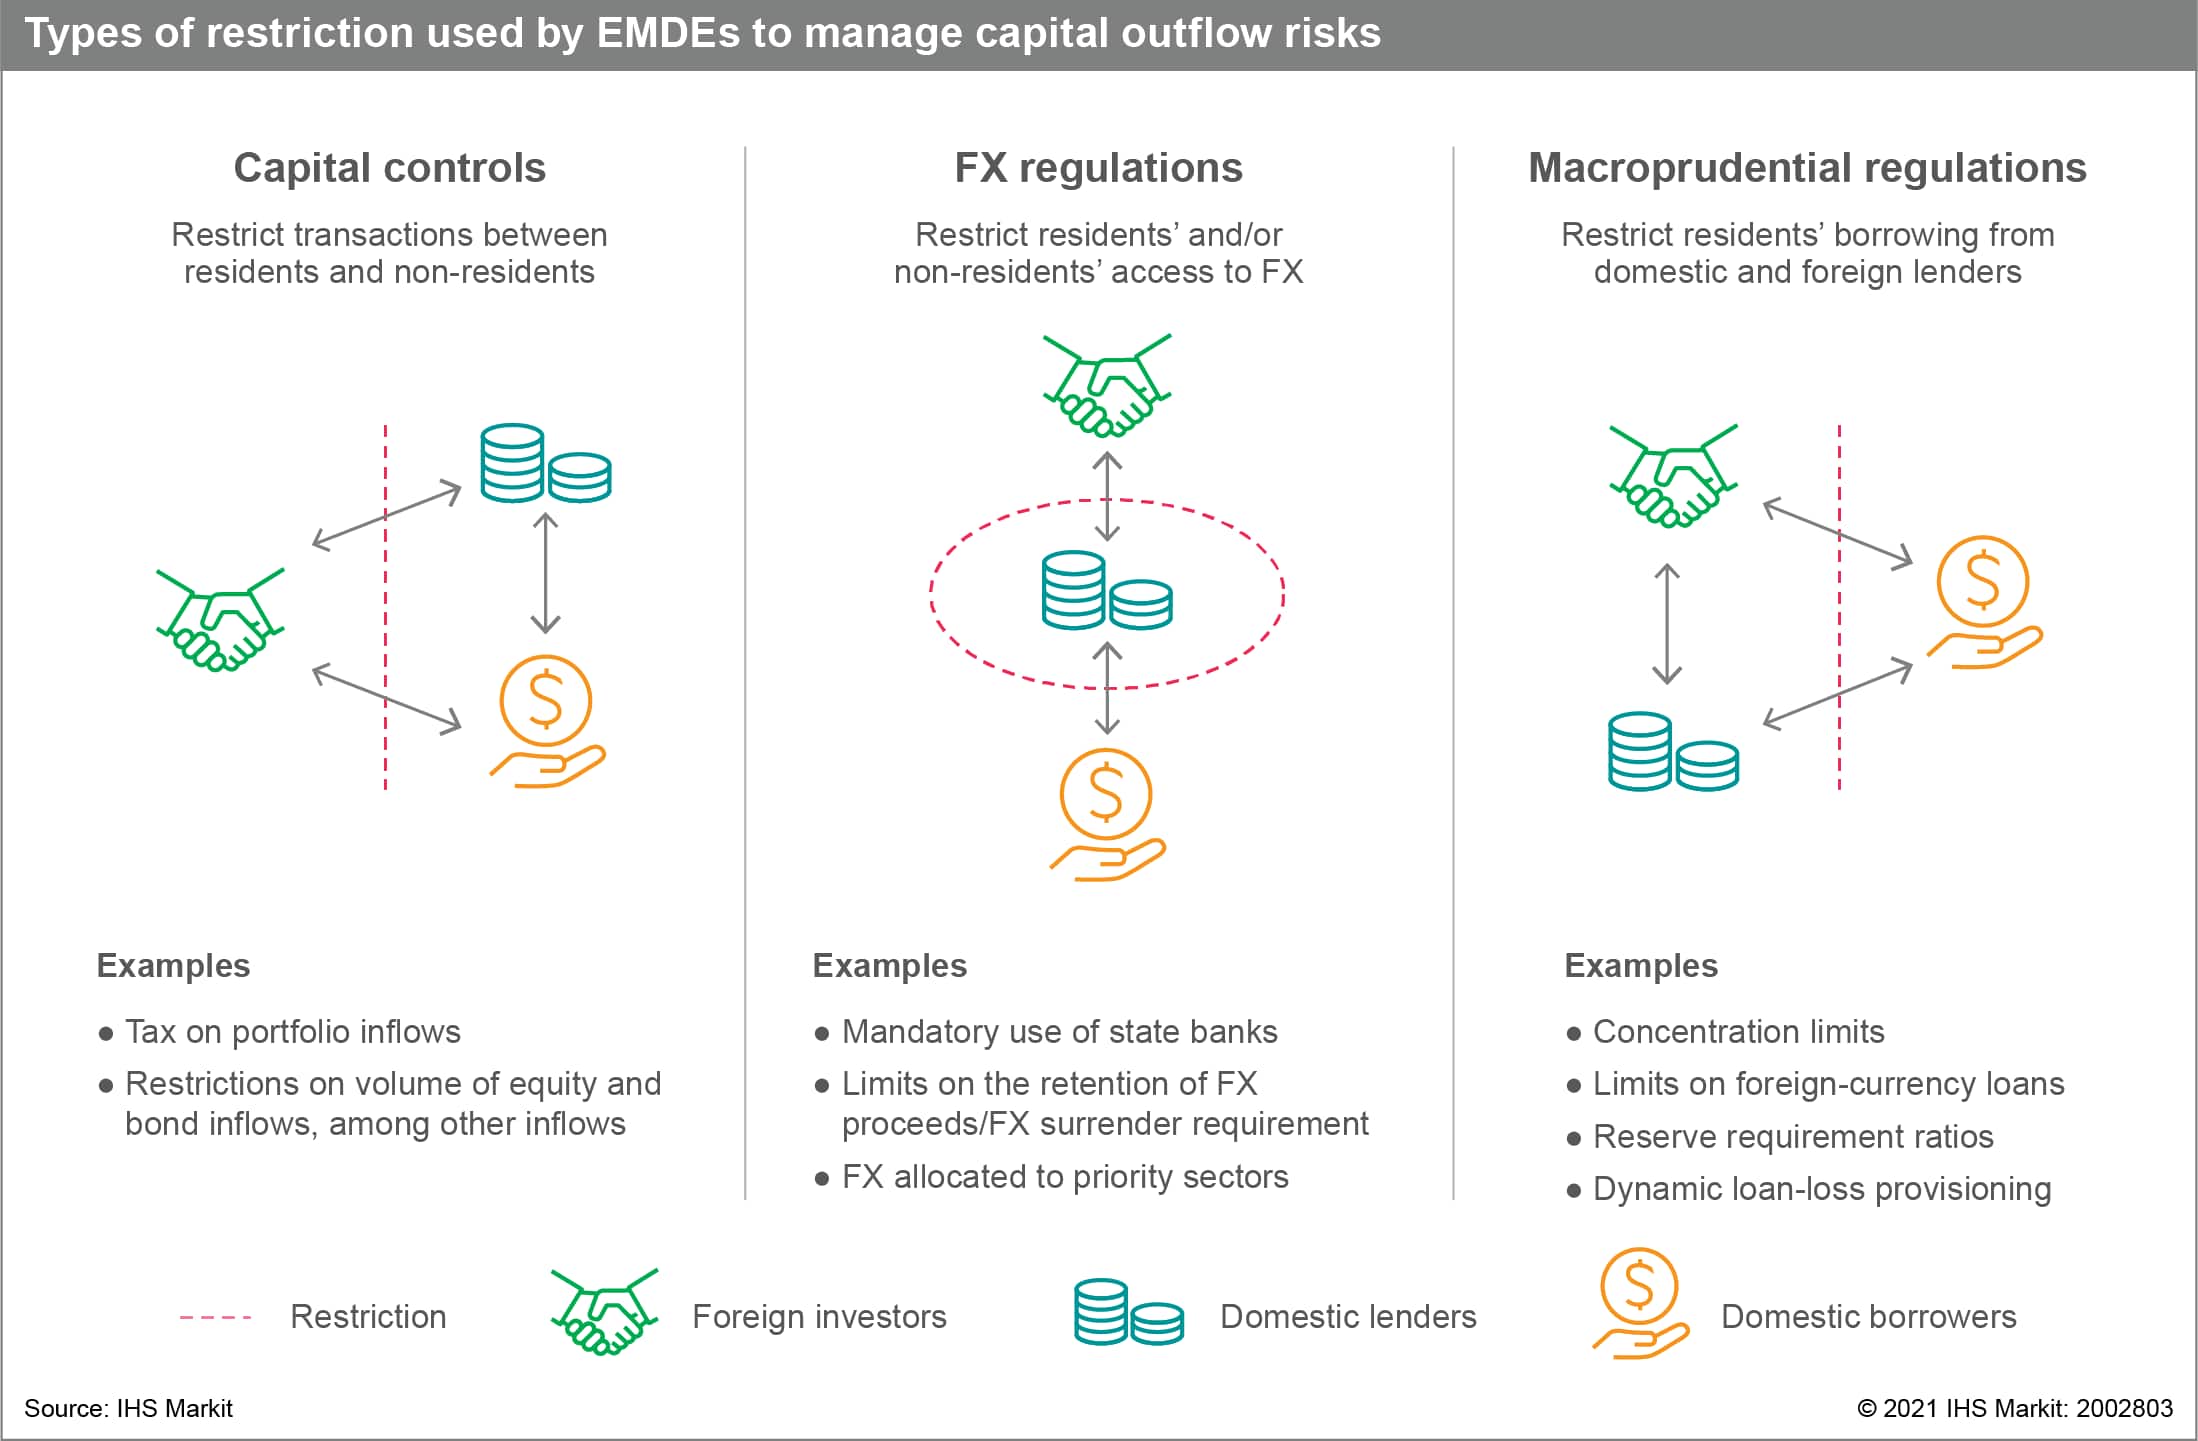 types of restrictions used by EMDEs to manage capital outflow risks